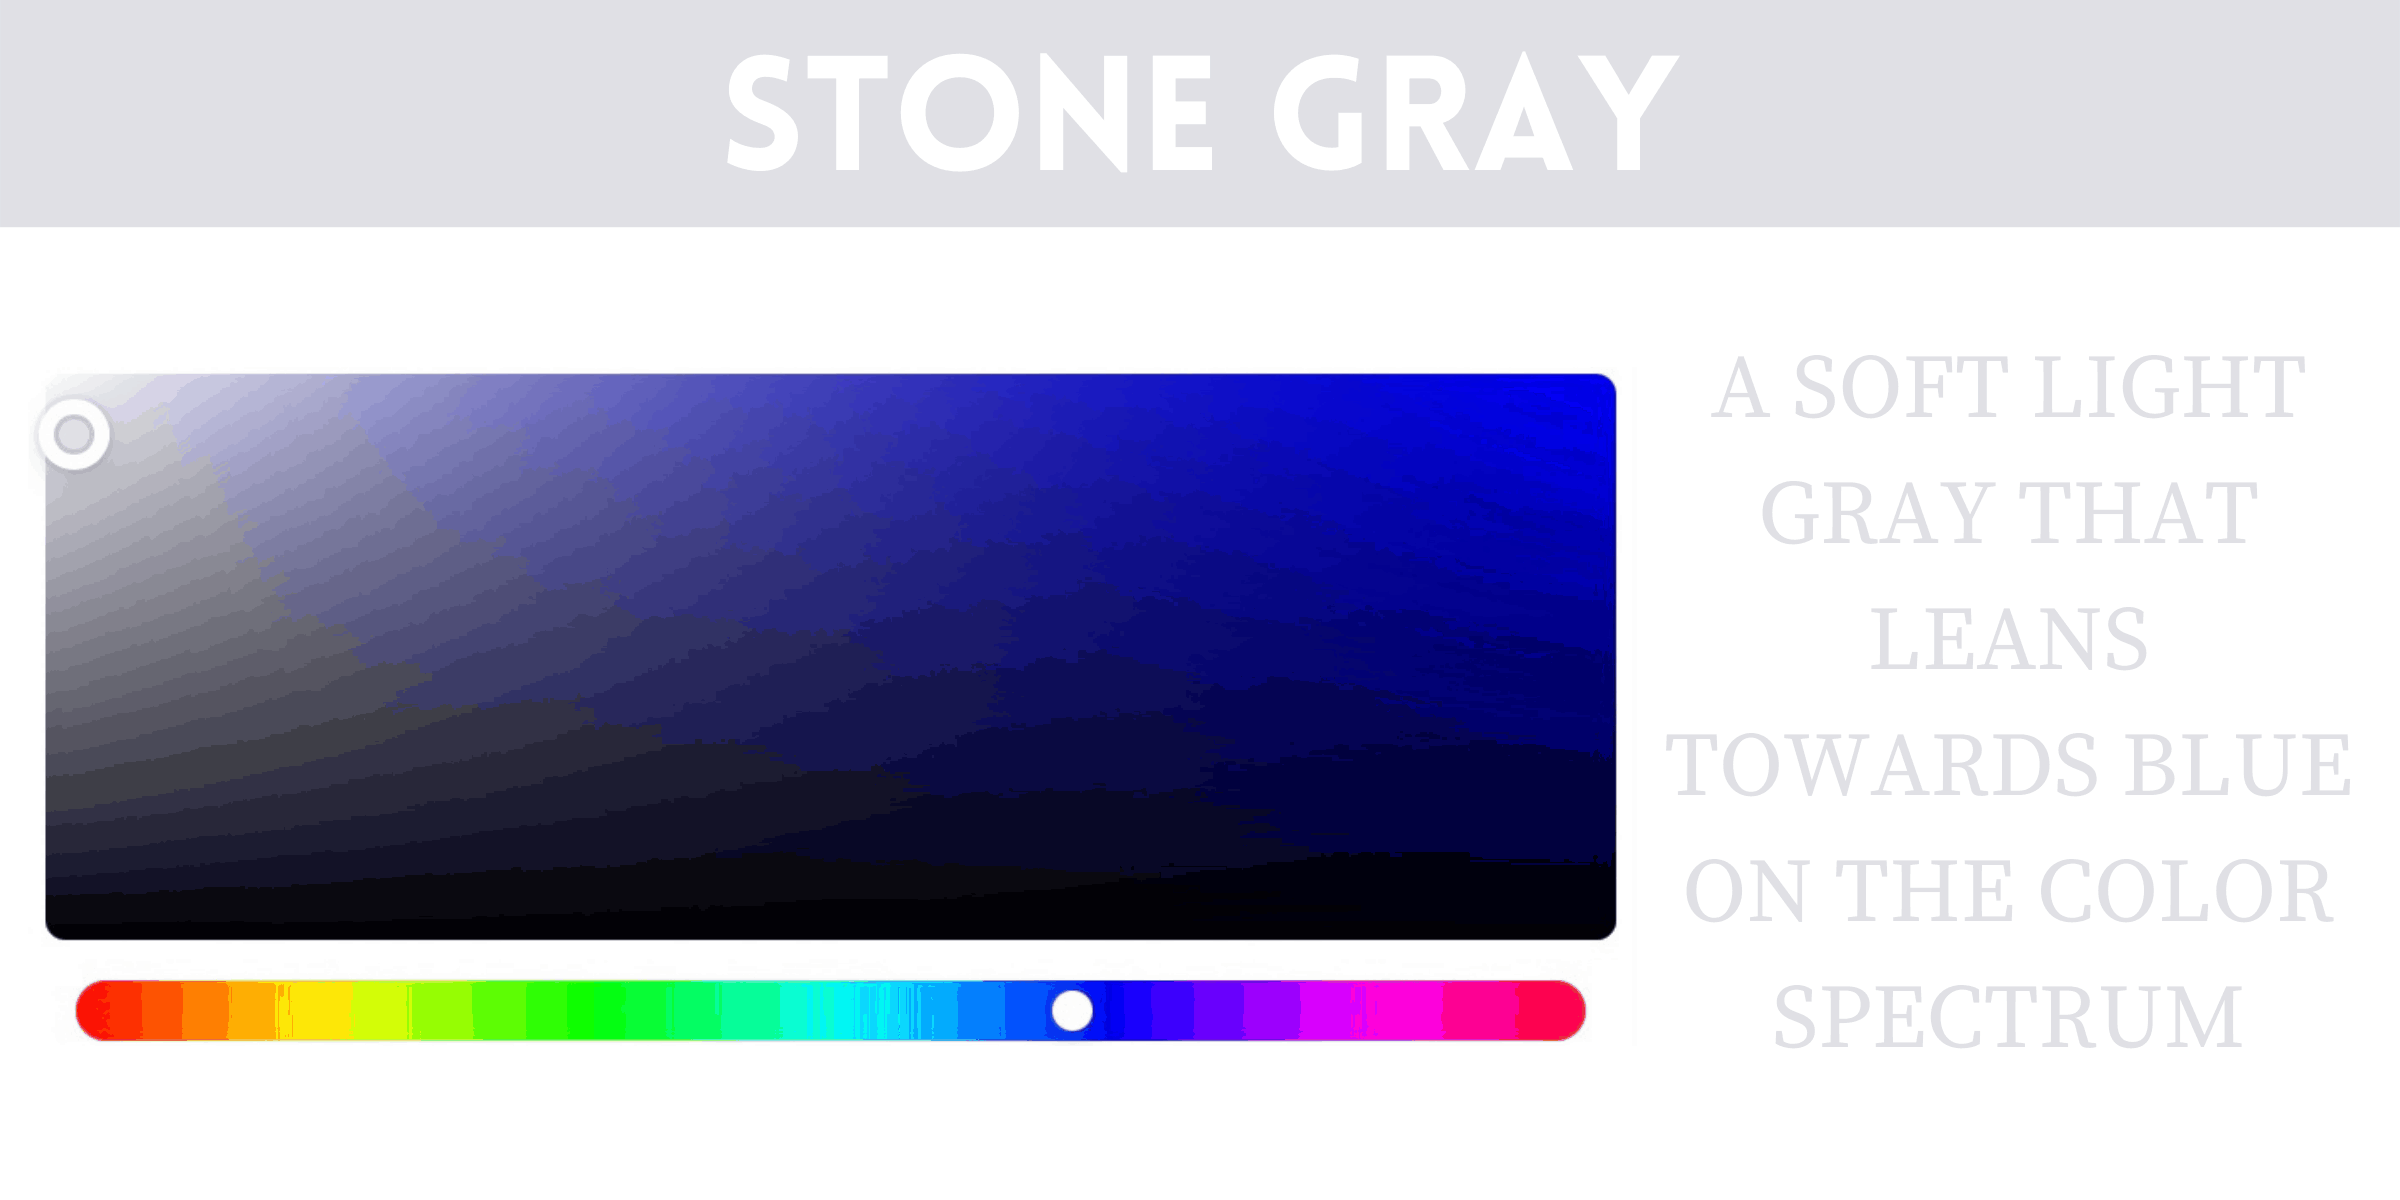 Stone Gray is a Universally Flattering cllor.